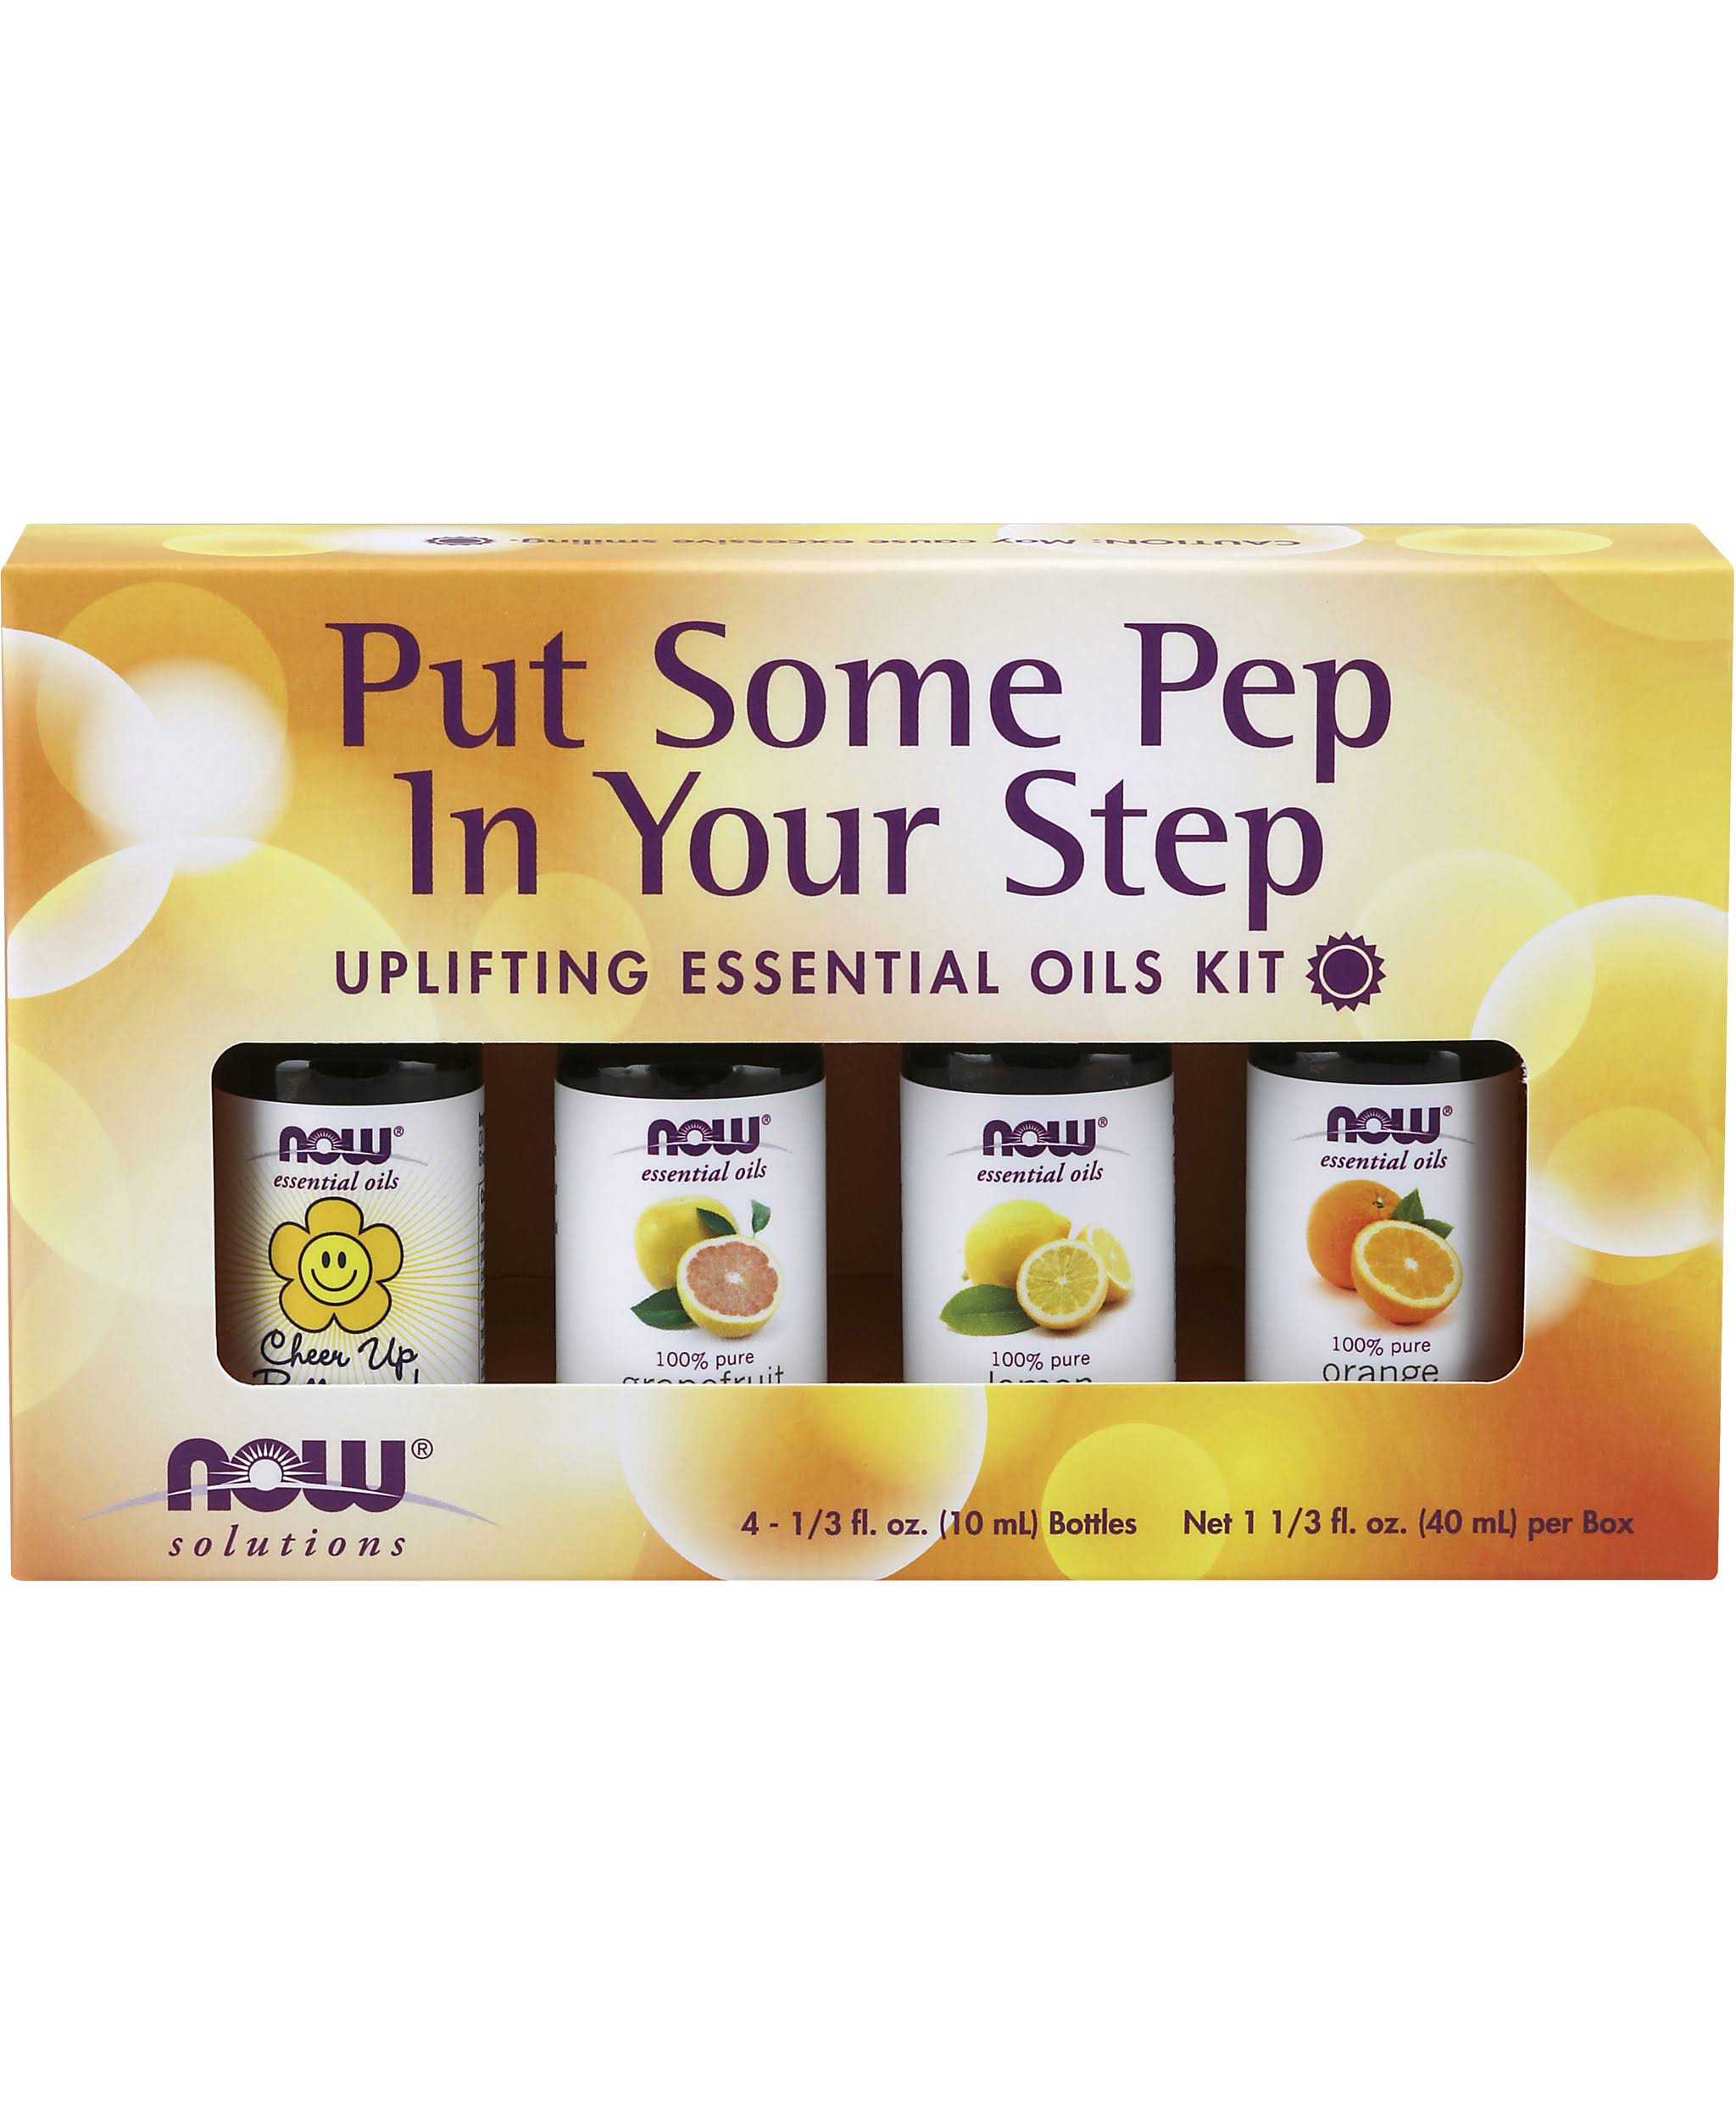 NOW Put Some Pep in Your Step Uplifting Essential Oil Kit